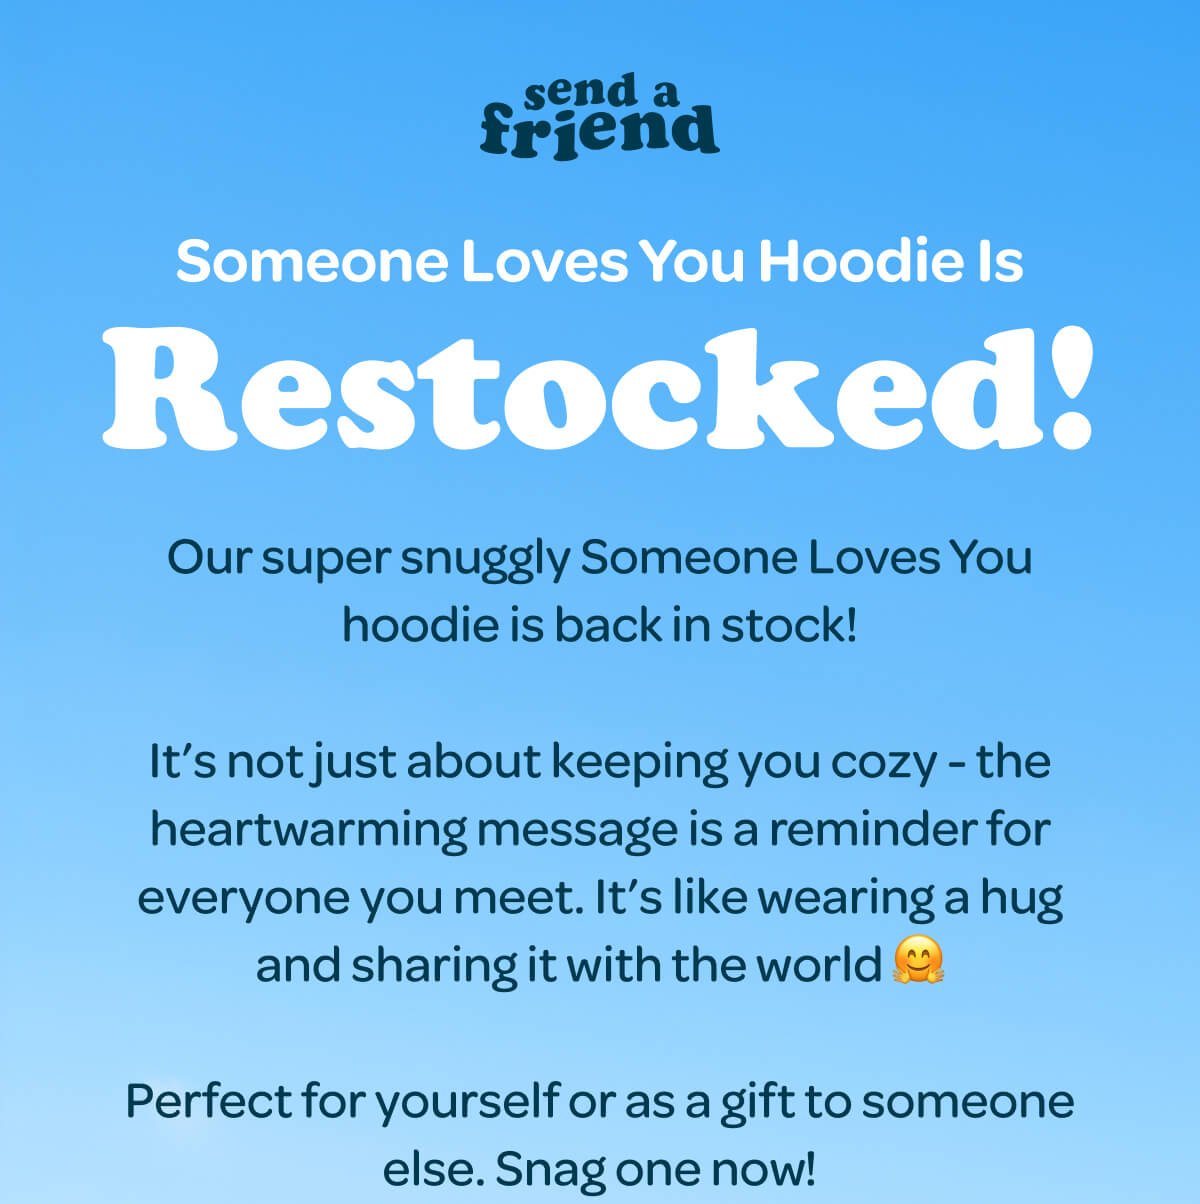 Someone Loves You Hoodie Is Restocked! Our super snuggly Someone Loves You hoodie is back in stock! It’s not just about keeping you cozy - the heartwarming message is a reminder for everyone you meet. It’s like wearing a hug and sharing it with the world 🤗 Perfect for yourself or as a gift to someone else. Snag one now!